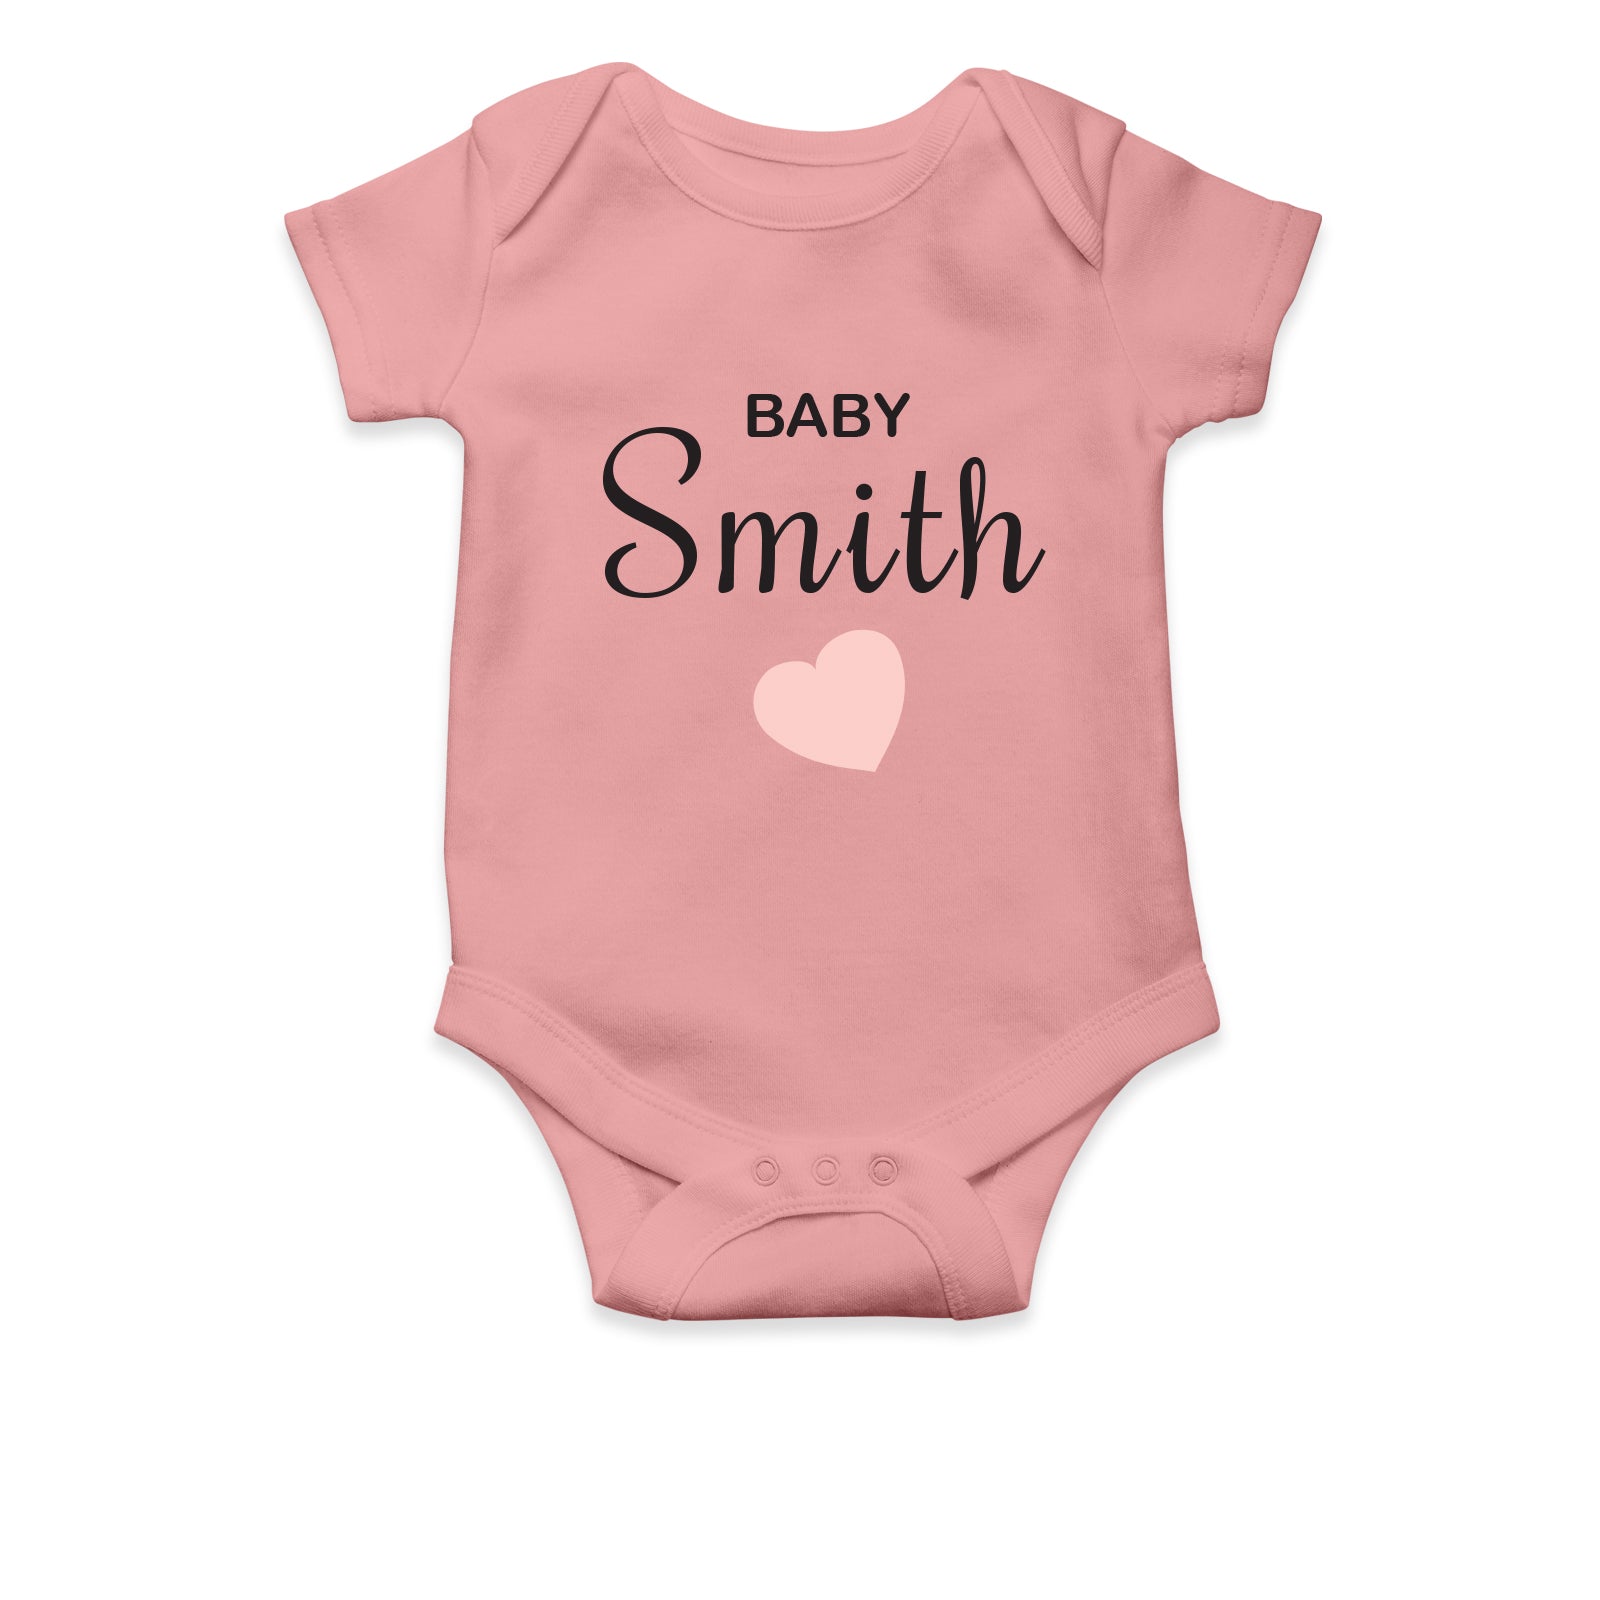 Personalised White Baby Body Suit Grow Vest - Pink Heart - Little One